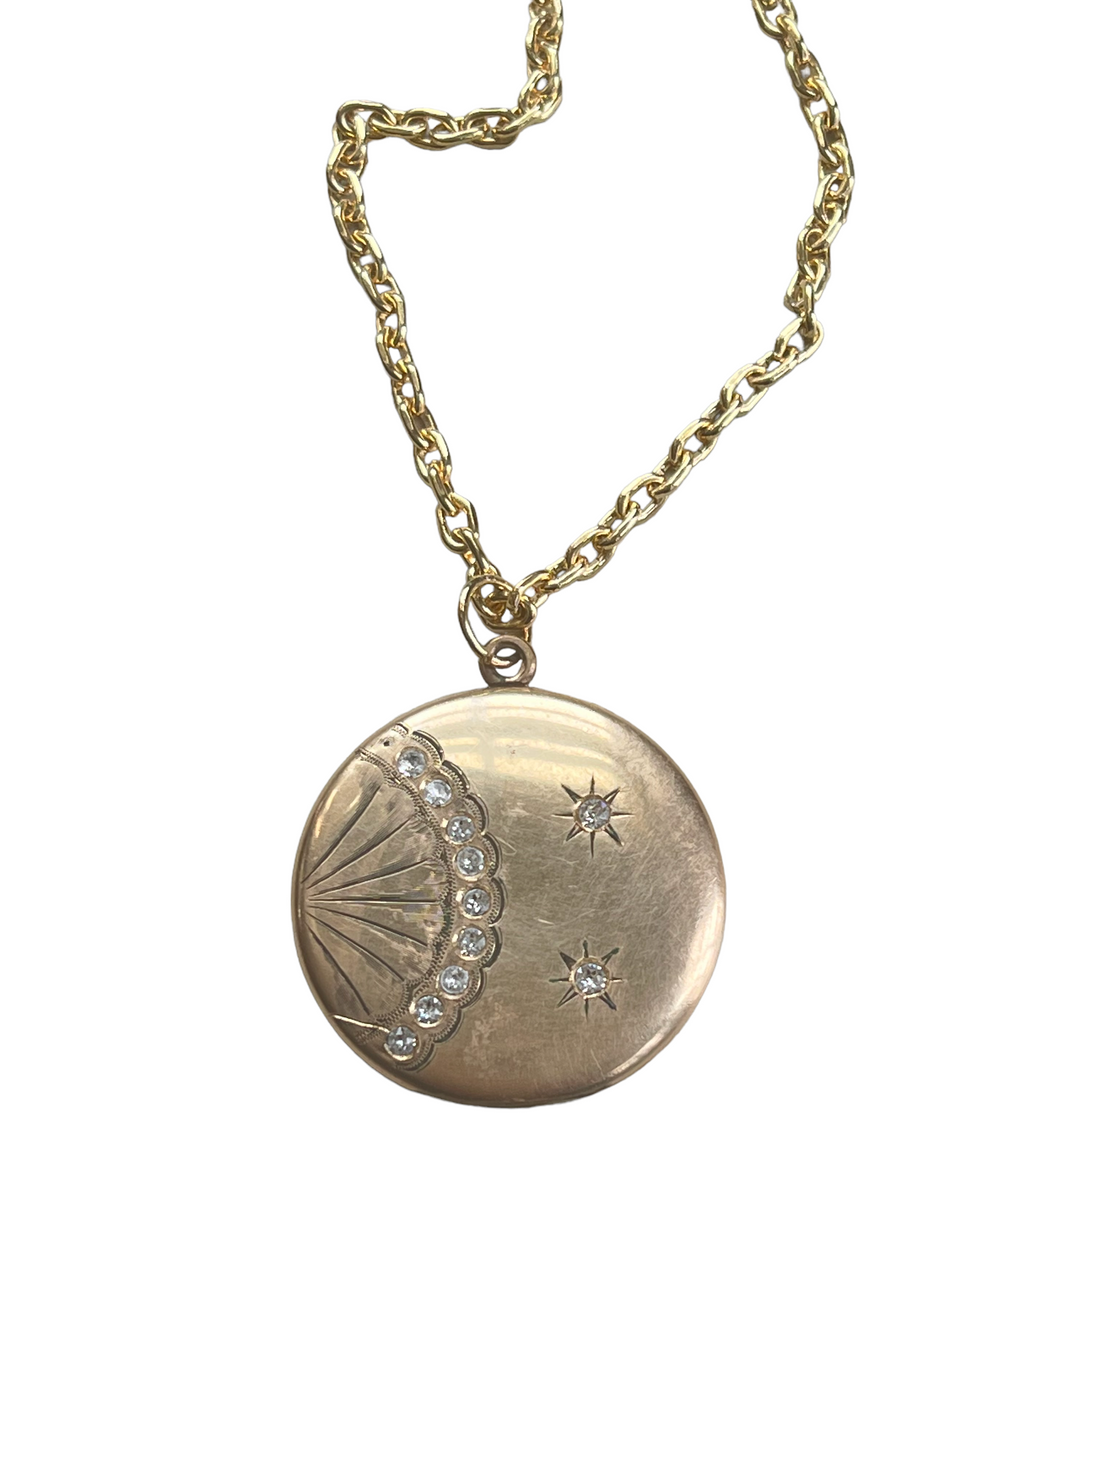 Art Deco Locket with gold chain by hipV Modern Vintage Jewerlry